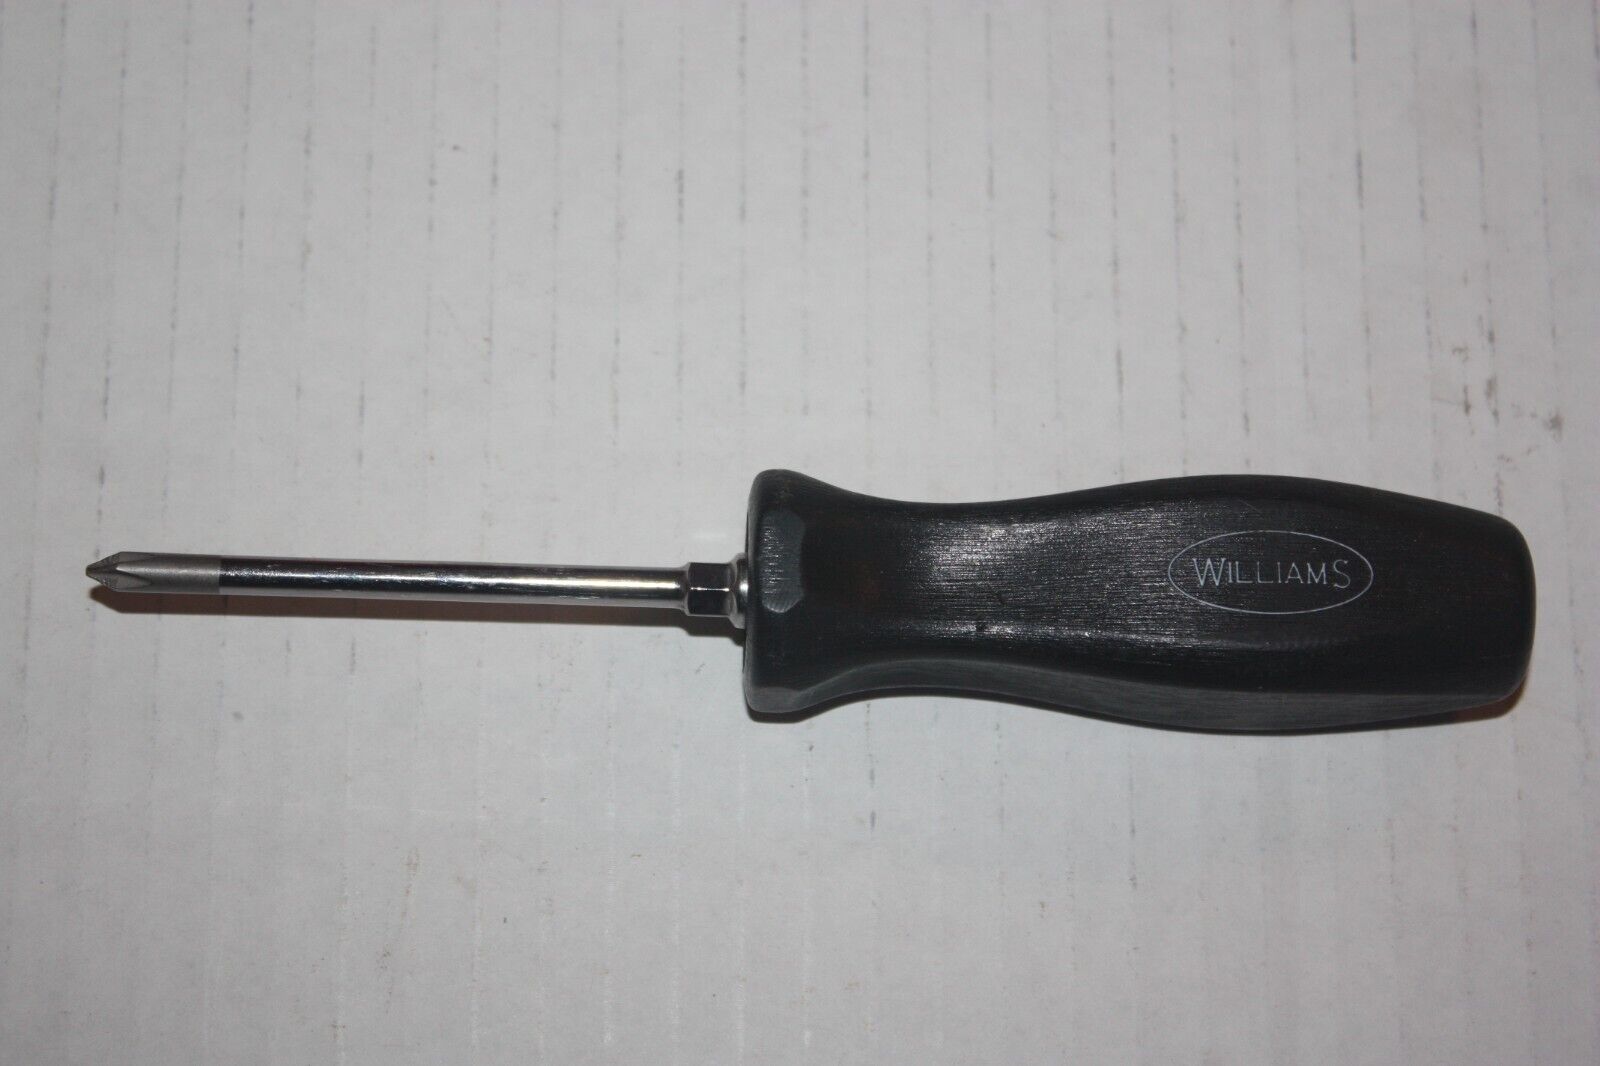 Williams Tools (owned By Snap-on) Sdp-1-3 Phillips Screwdriver